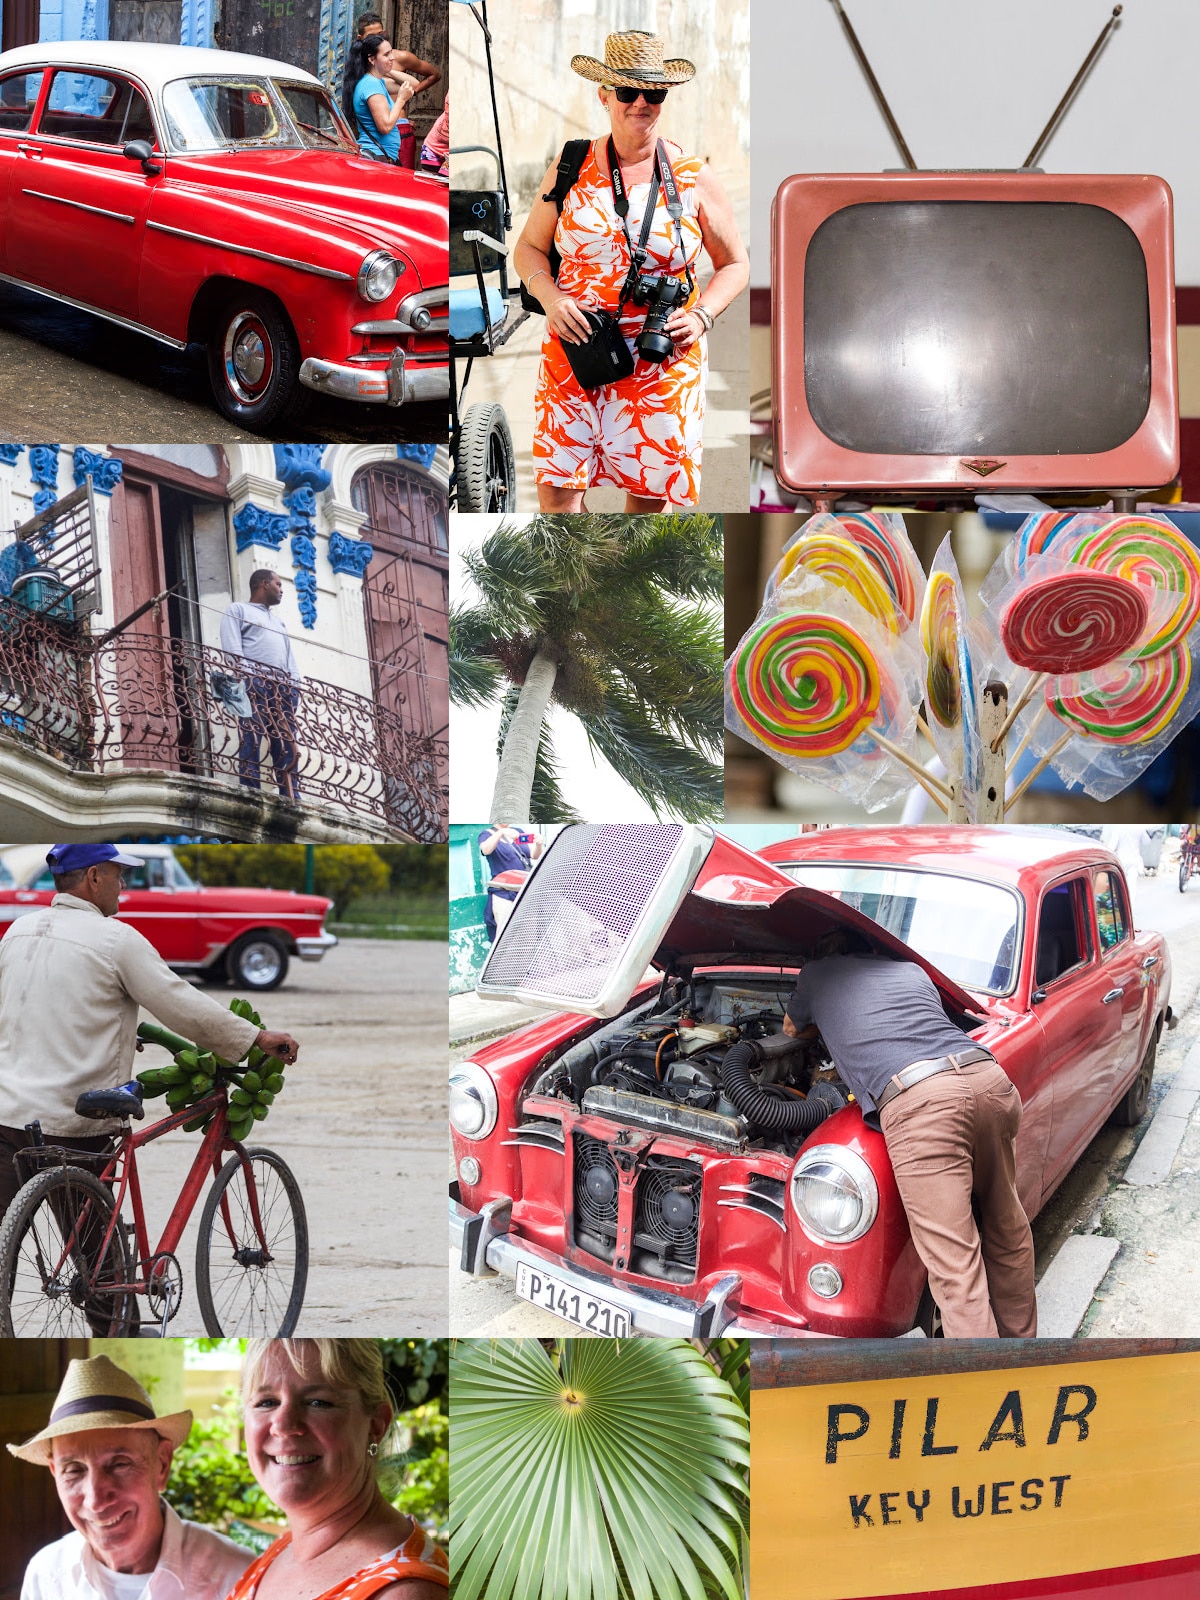 A collage of photos from Cuba of people, cars, food and more.